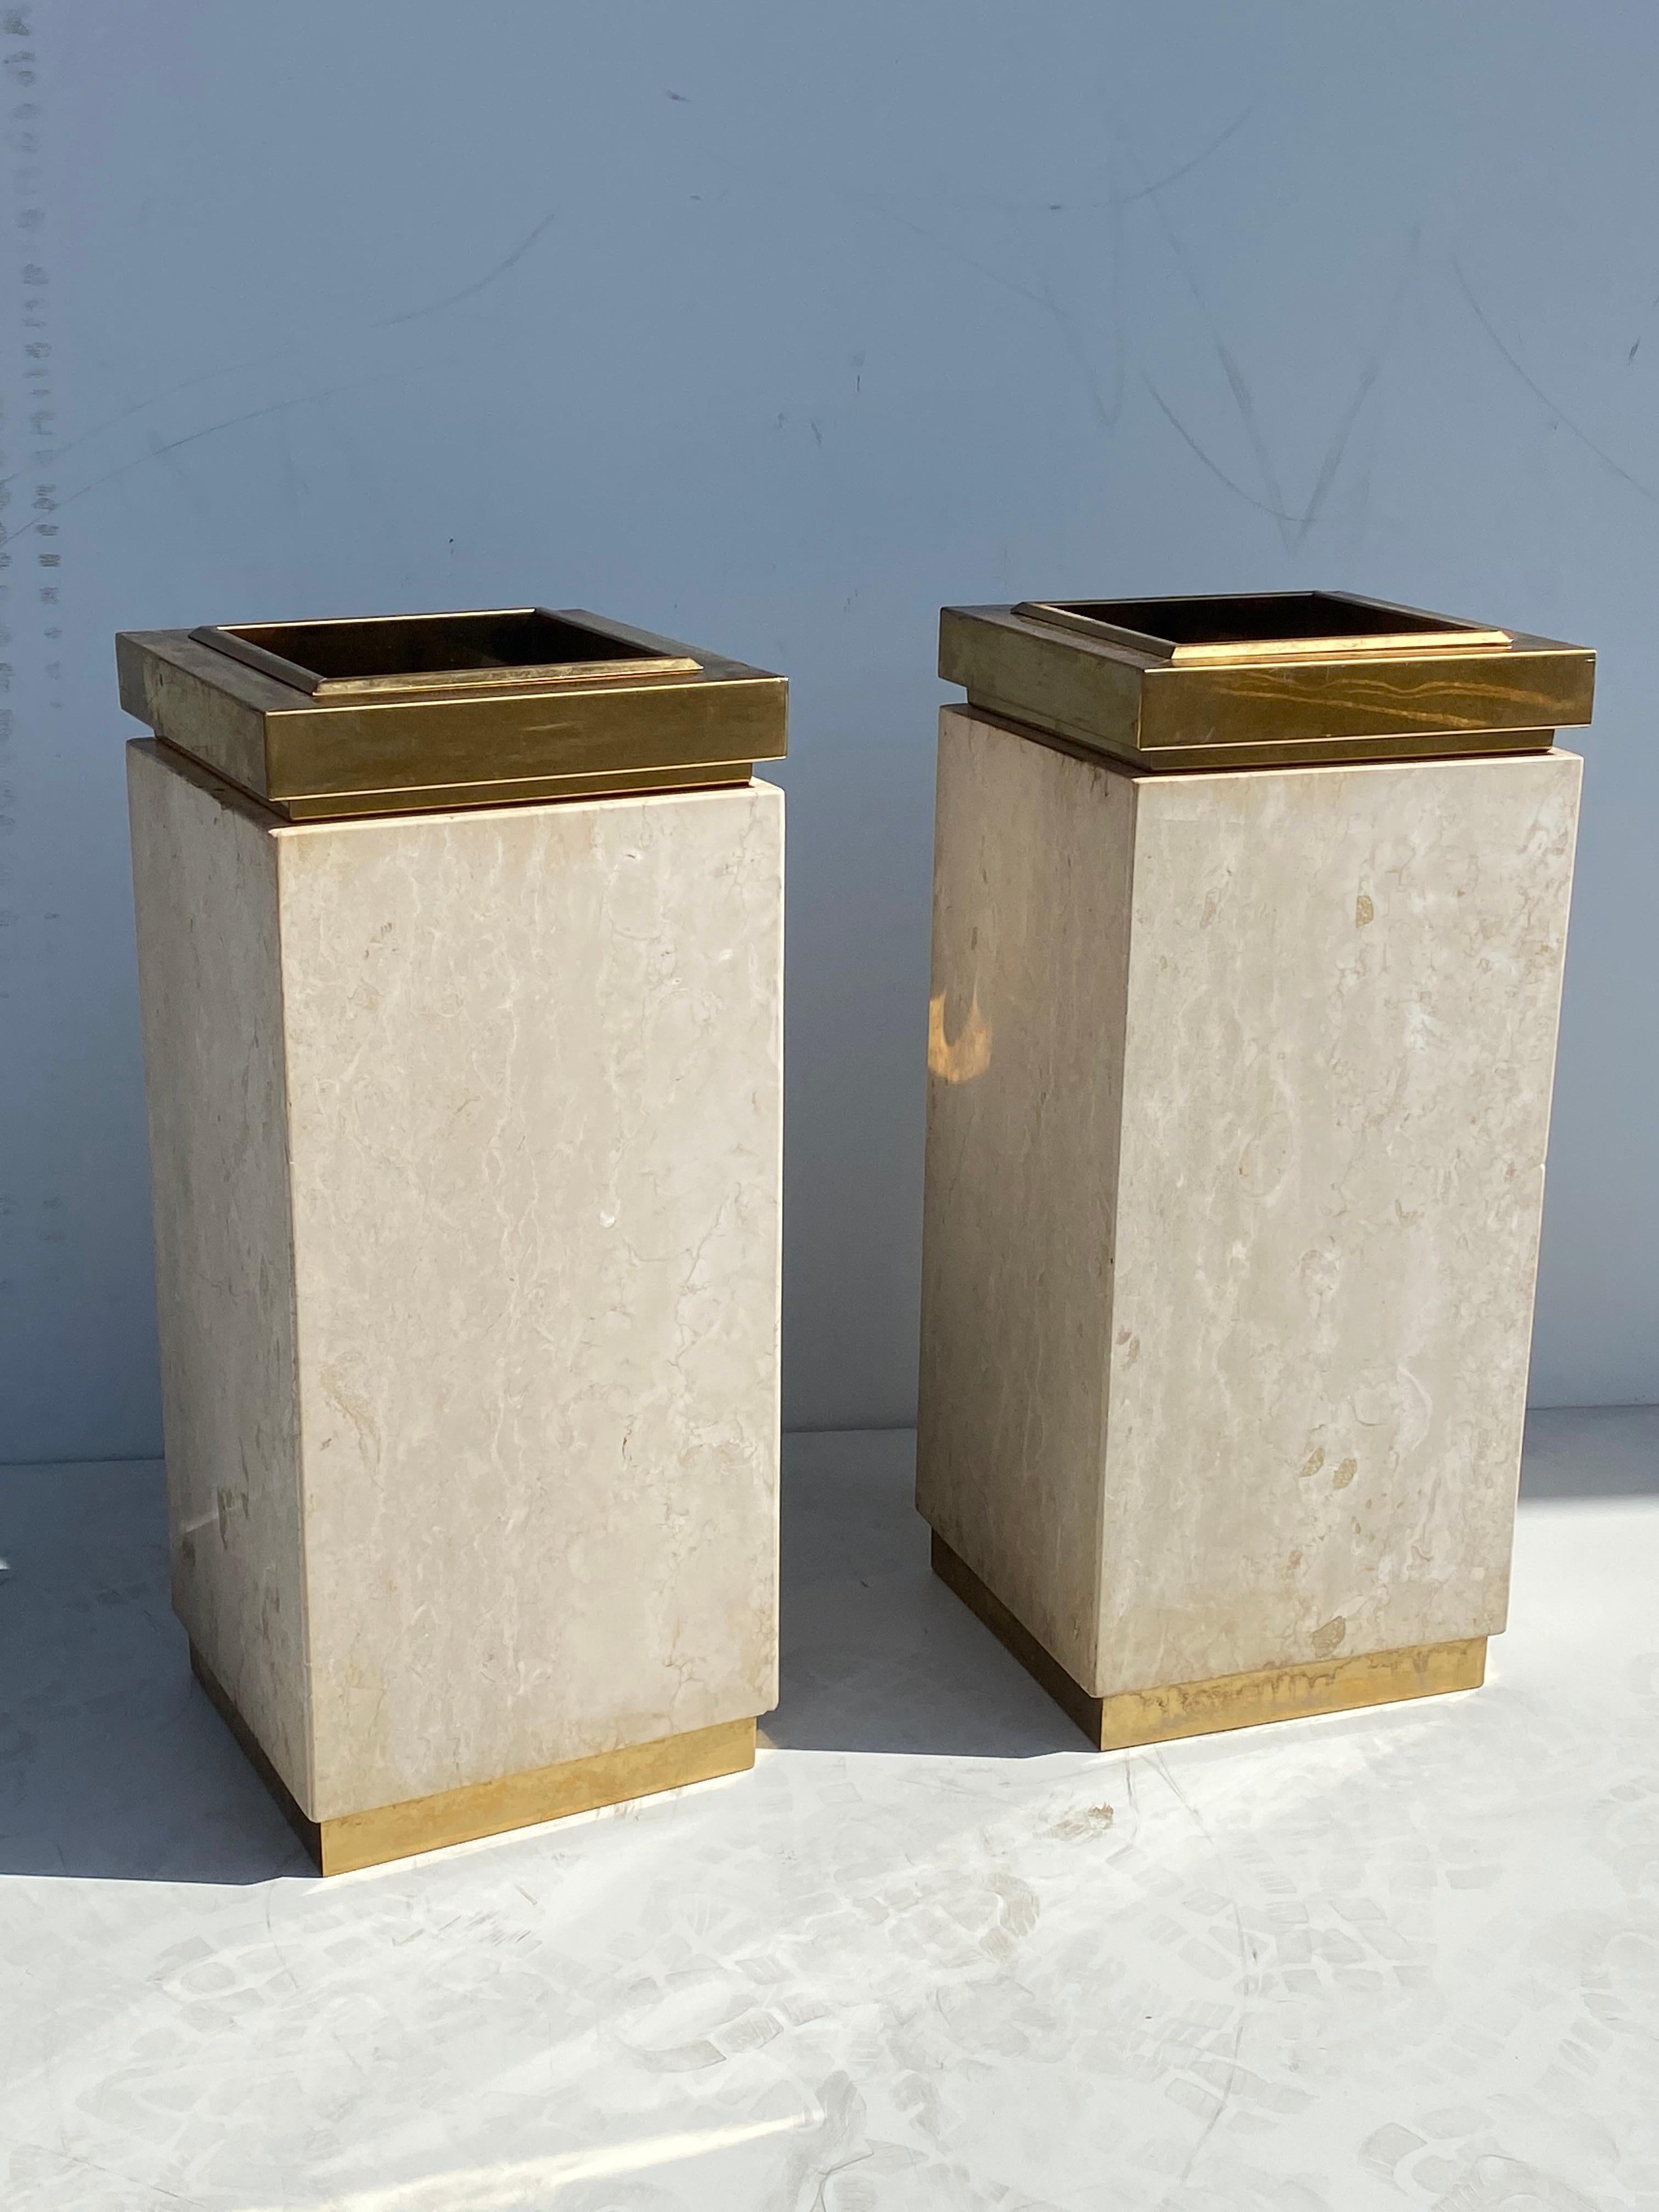 Pair of travertine and brass plated metal trash cans / planters.
Scratches on travertine and small dents and age spots on metal.